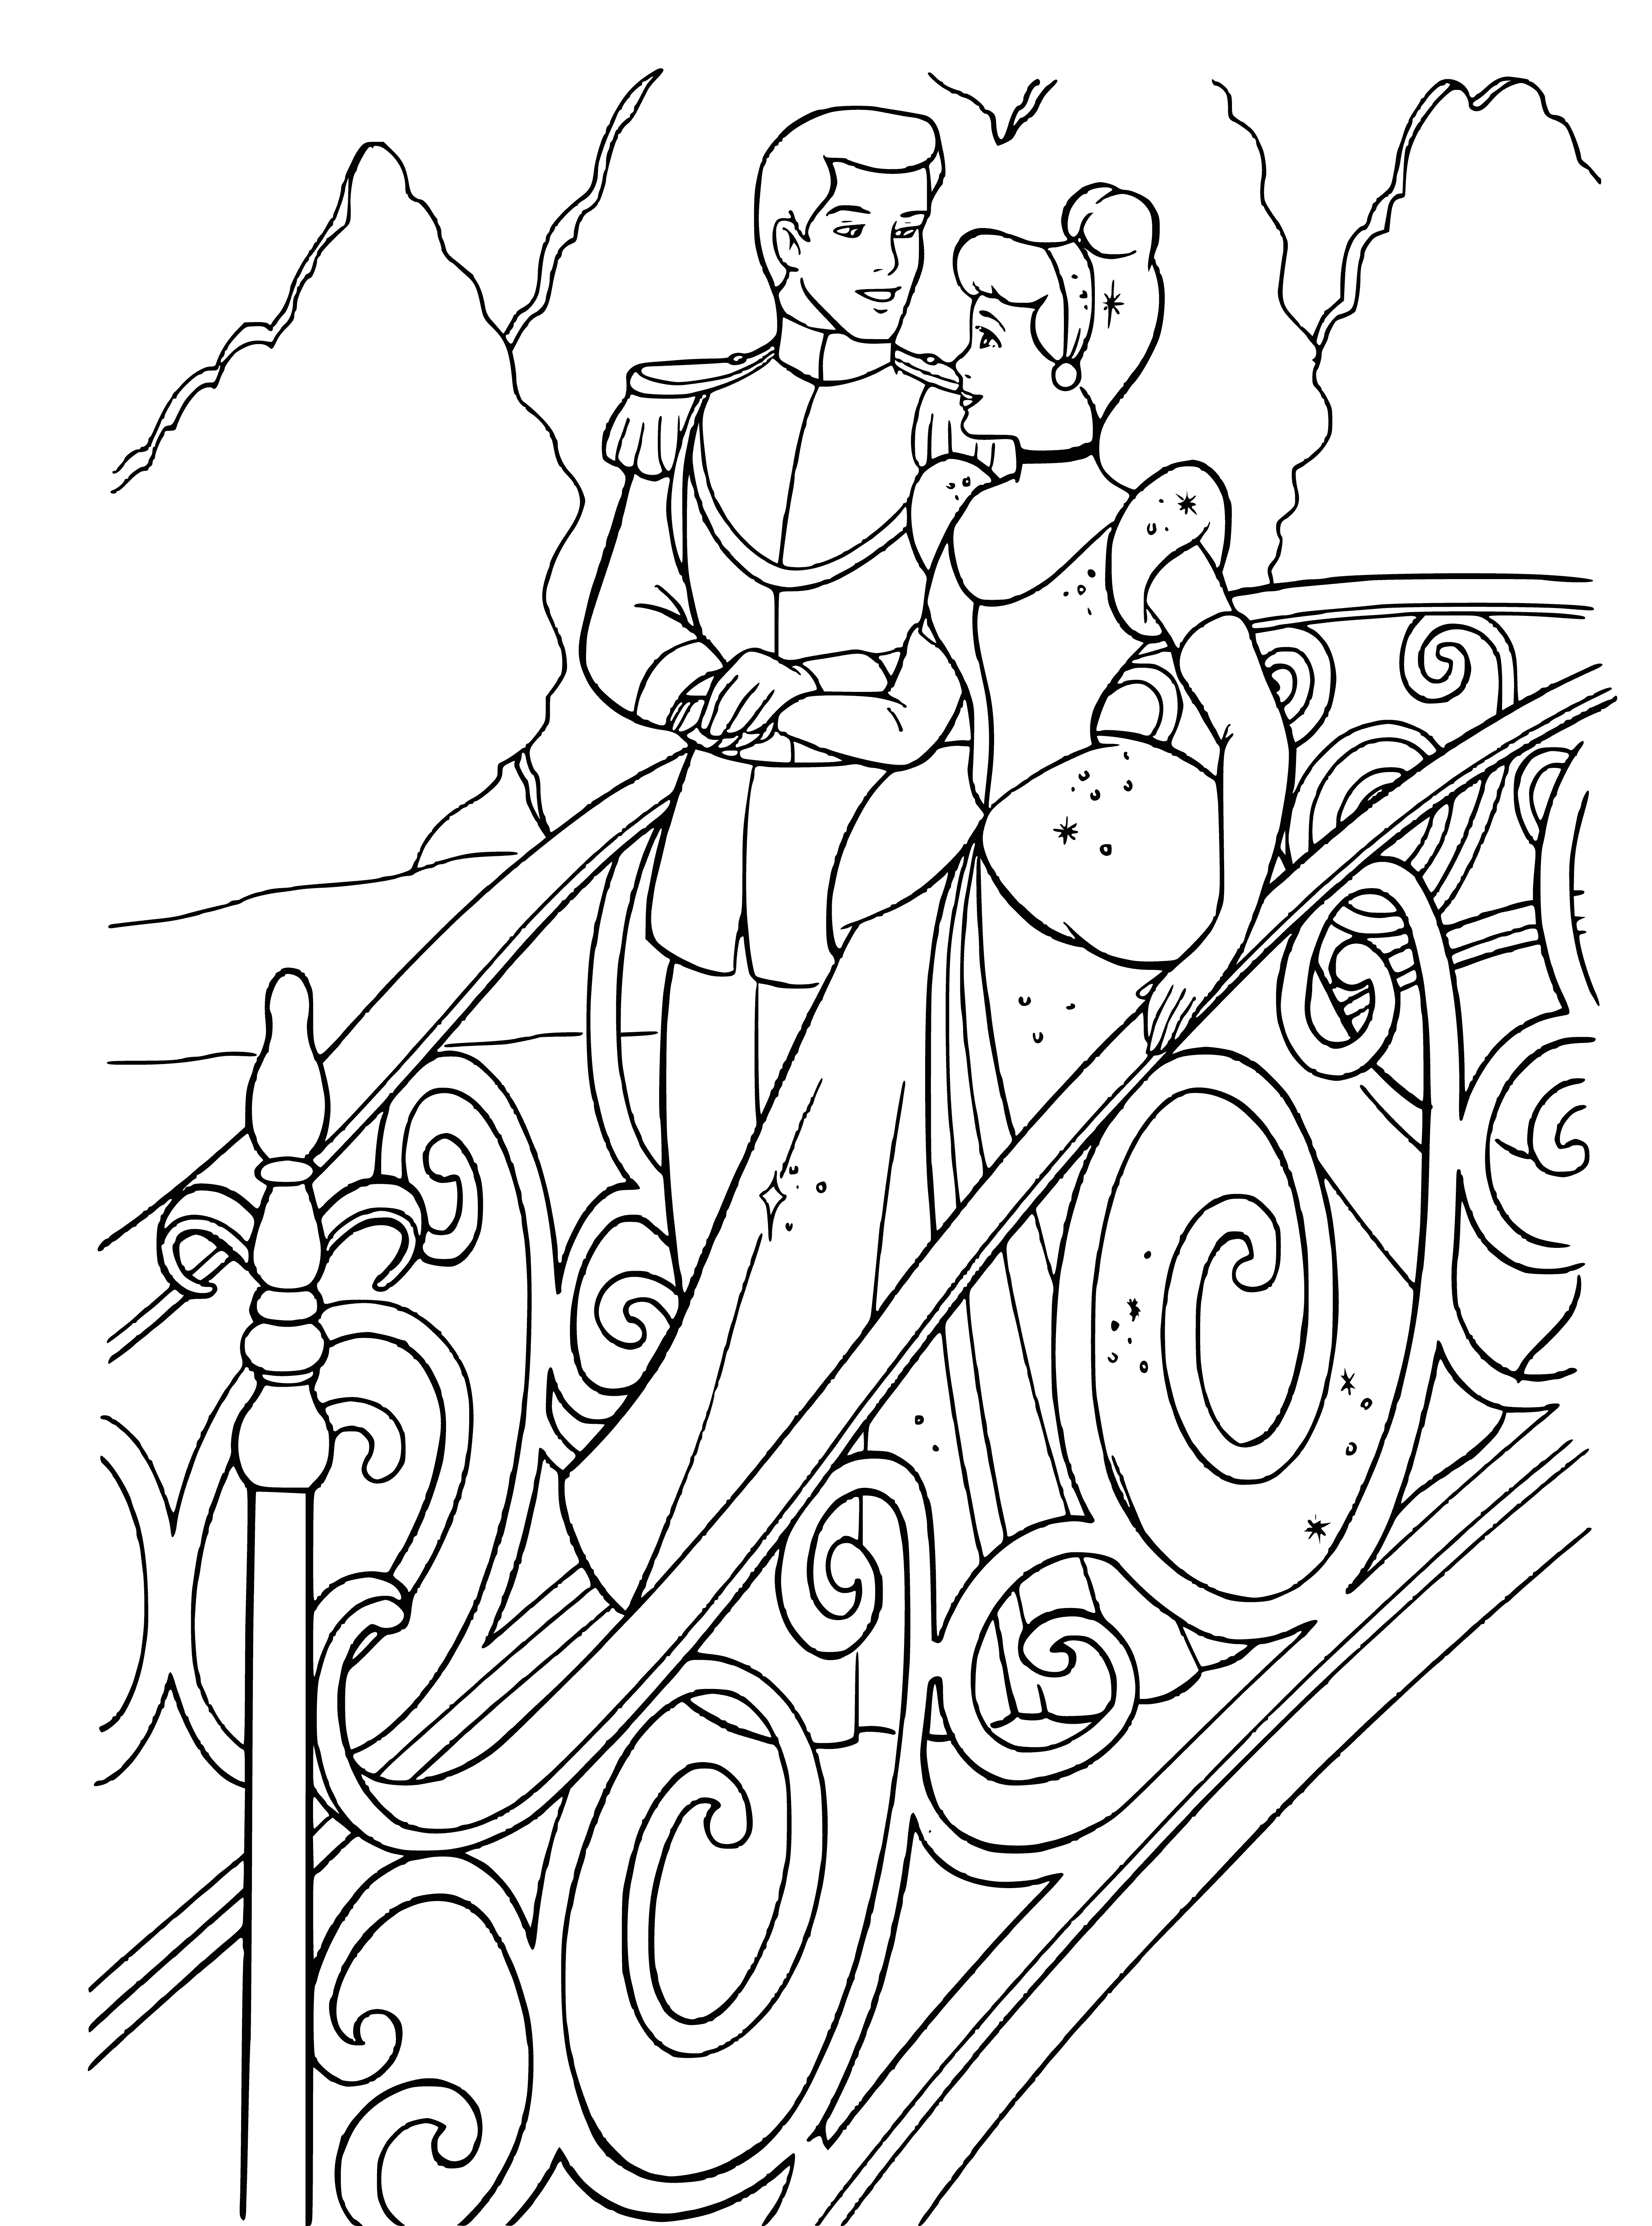 coloring page: Cinderella and her handsome prince dance and look happy together, and their love brings them happiness and joy.